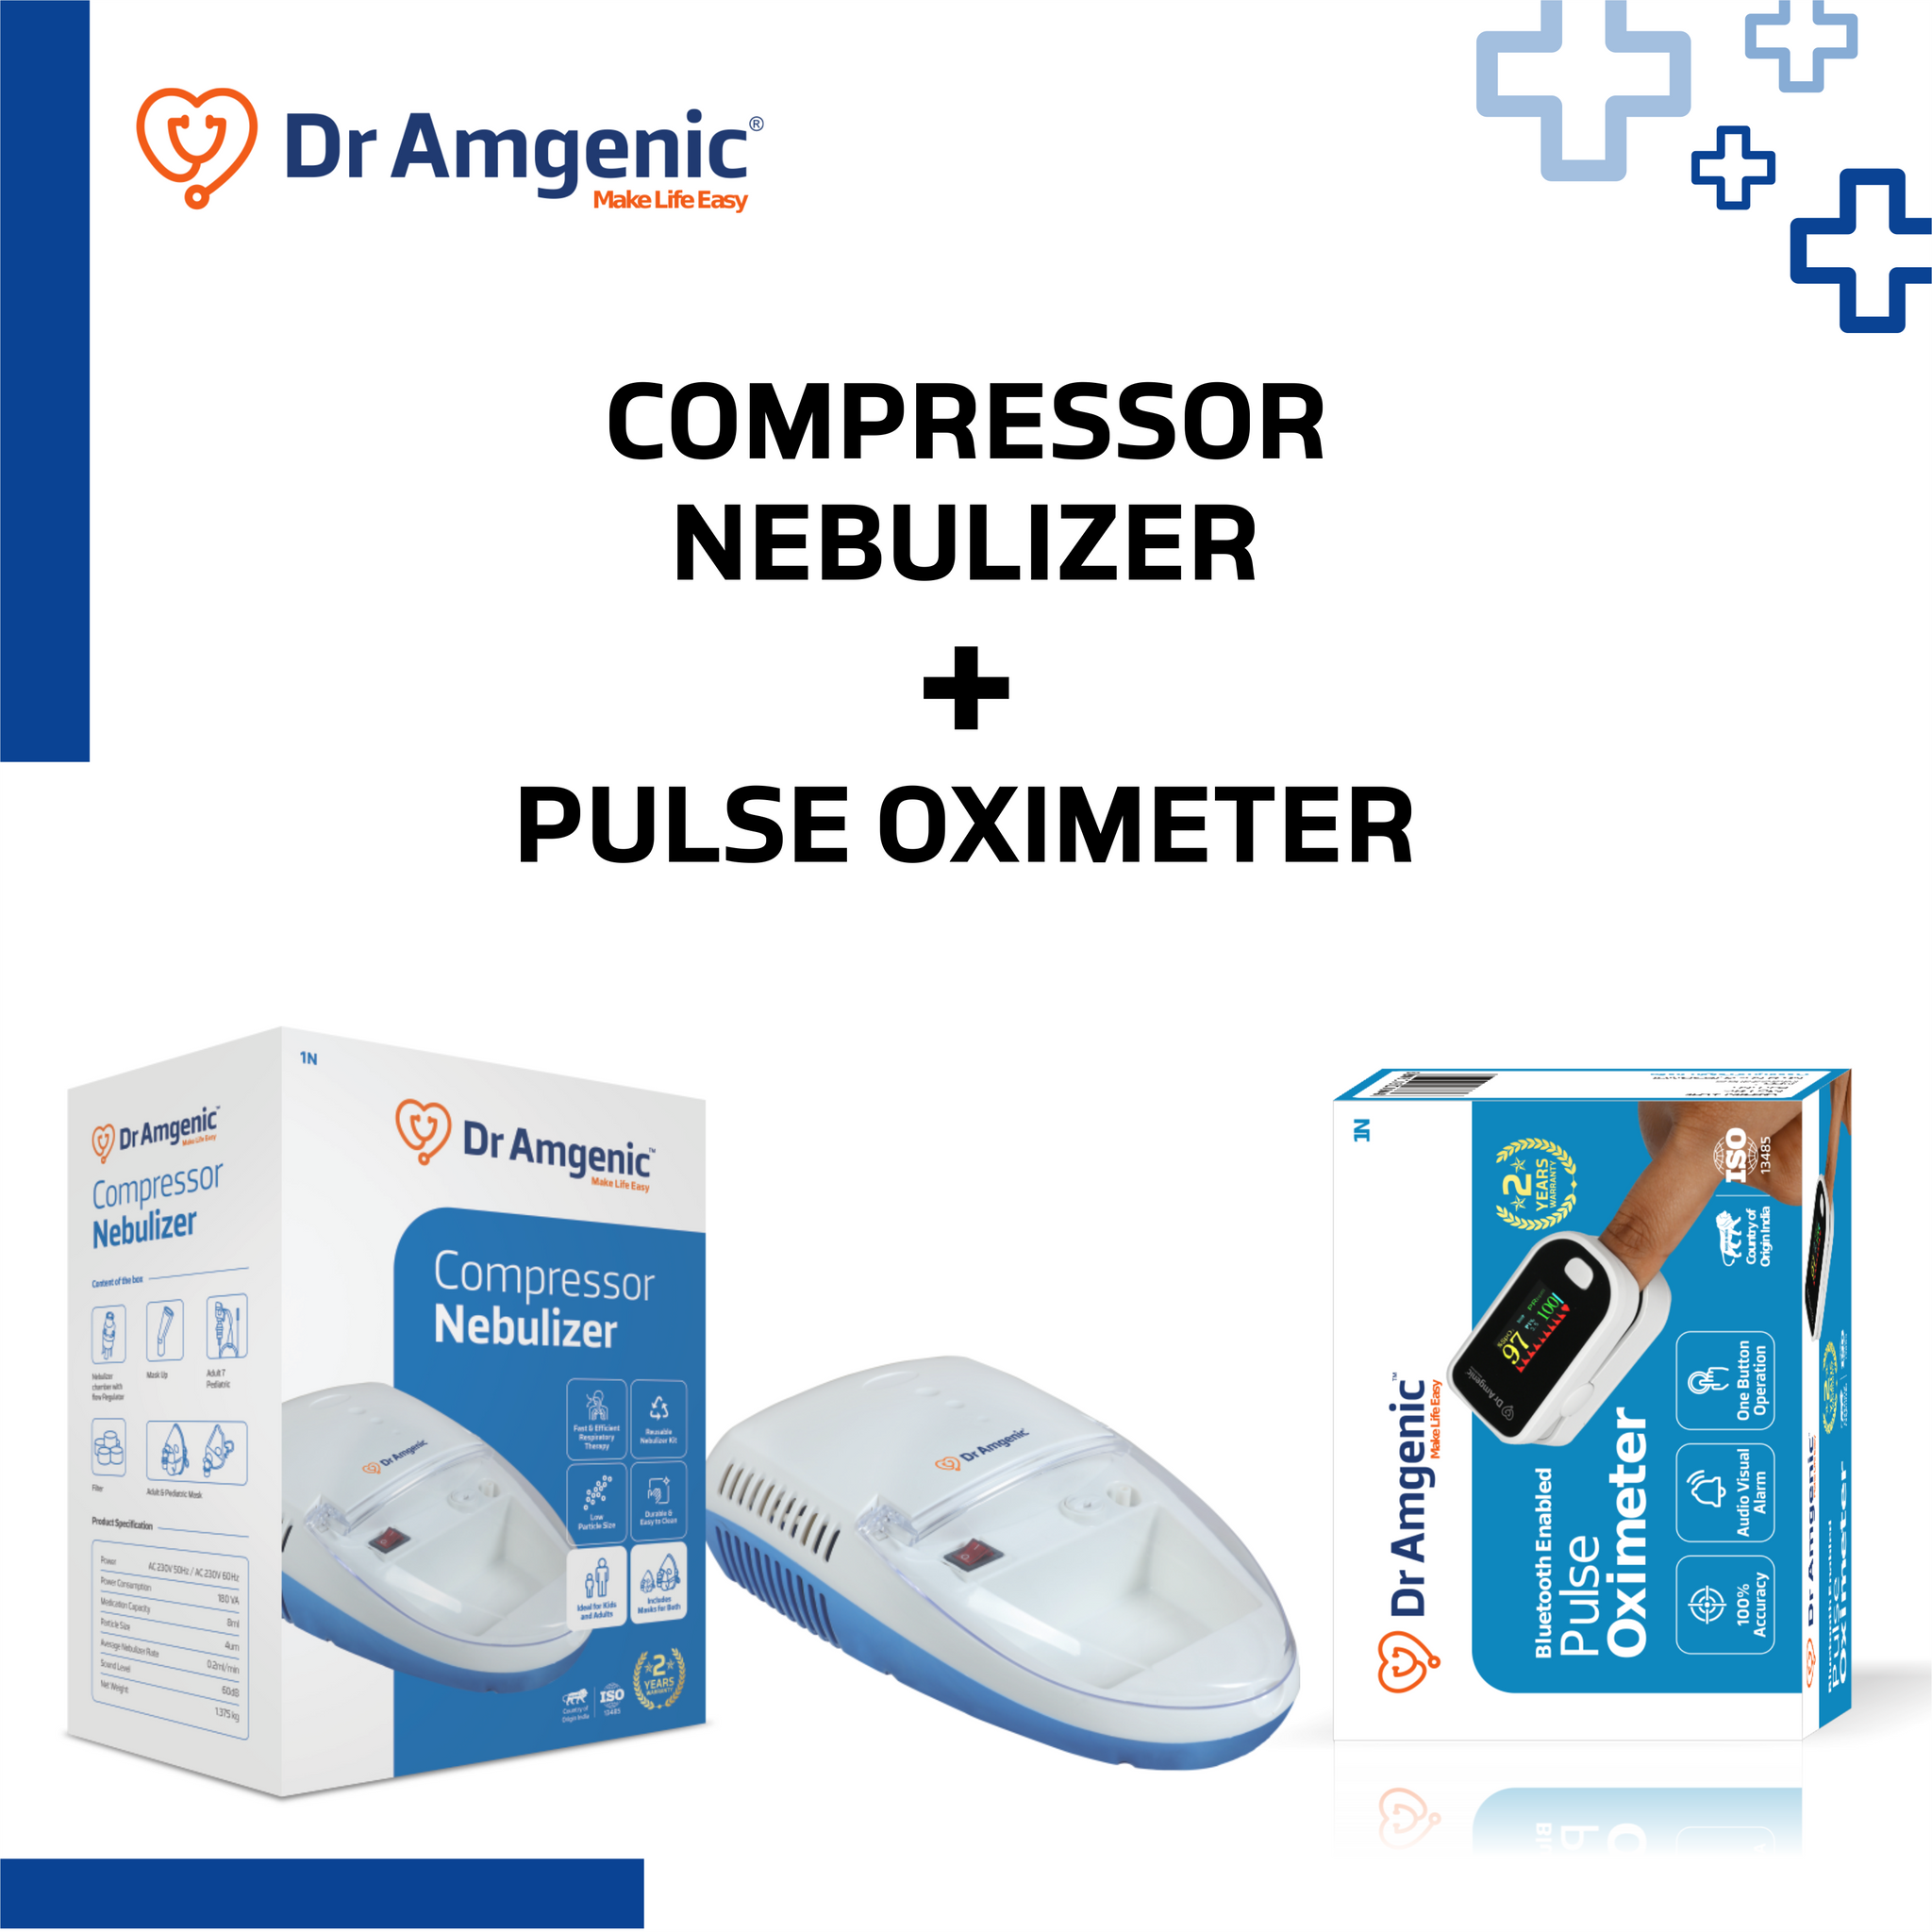 Dr Amgenic Advanced Compressor Nebulizer and Pulse Oximeter Combo